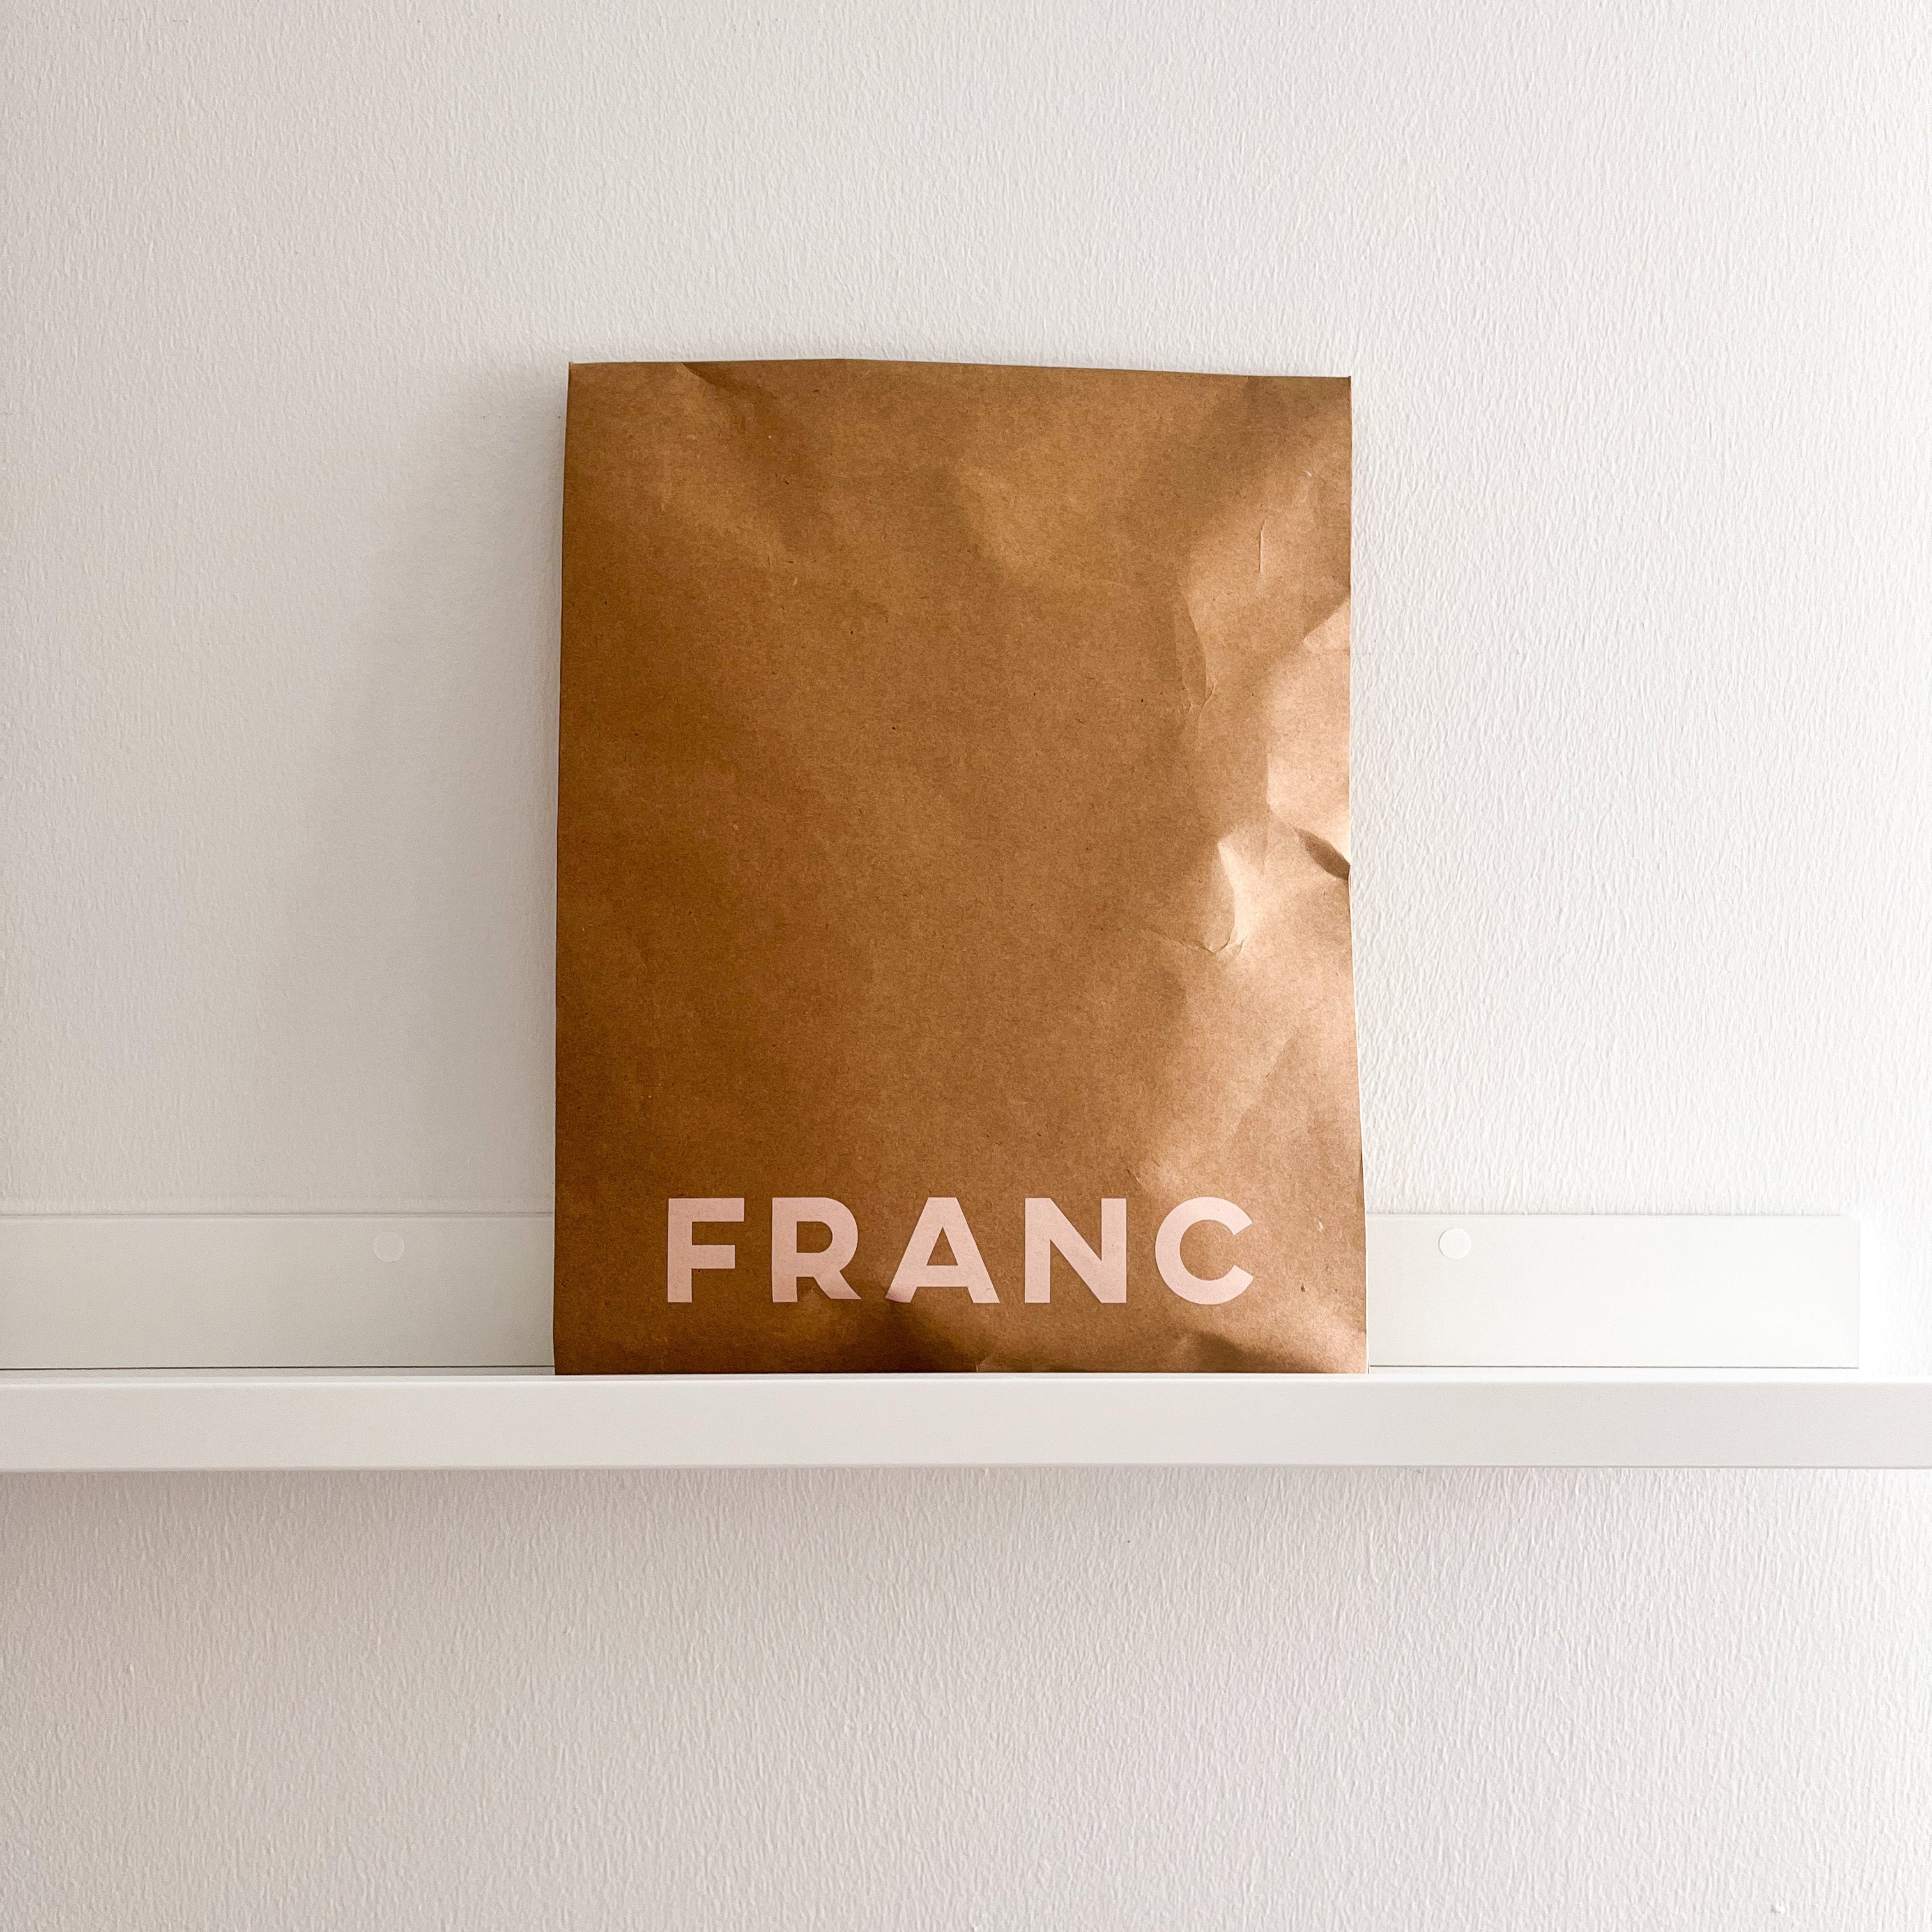 The Most Eco-Friendly Mailers We've Ever Used - FRANC